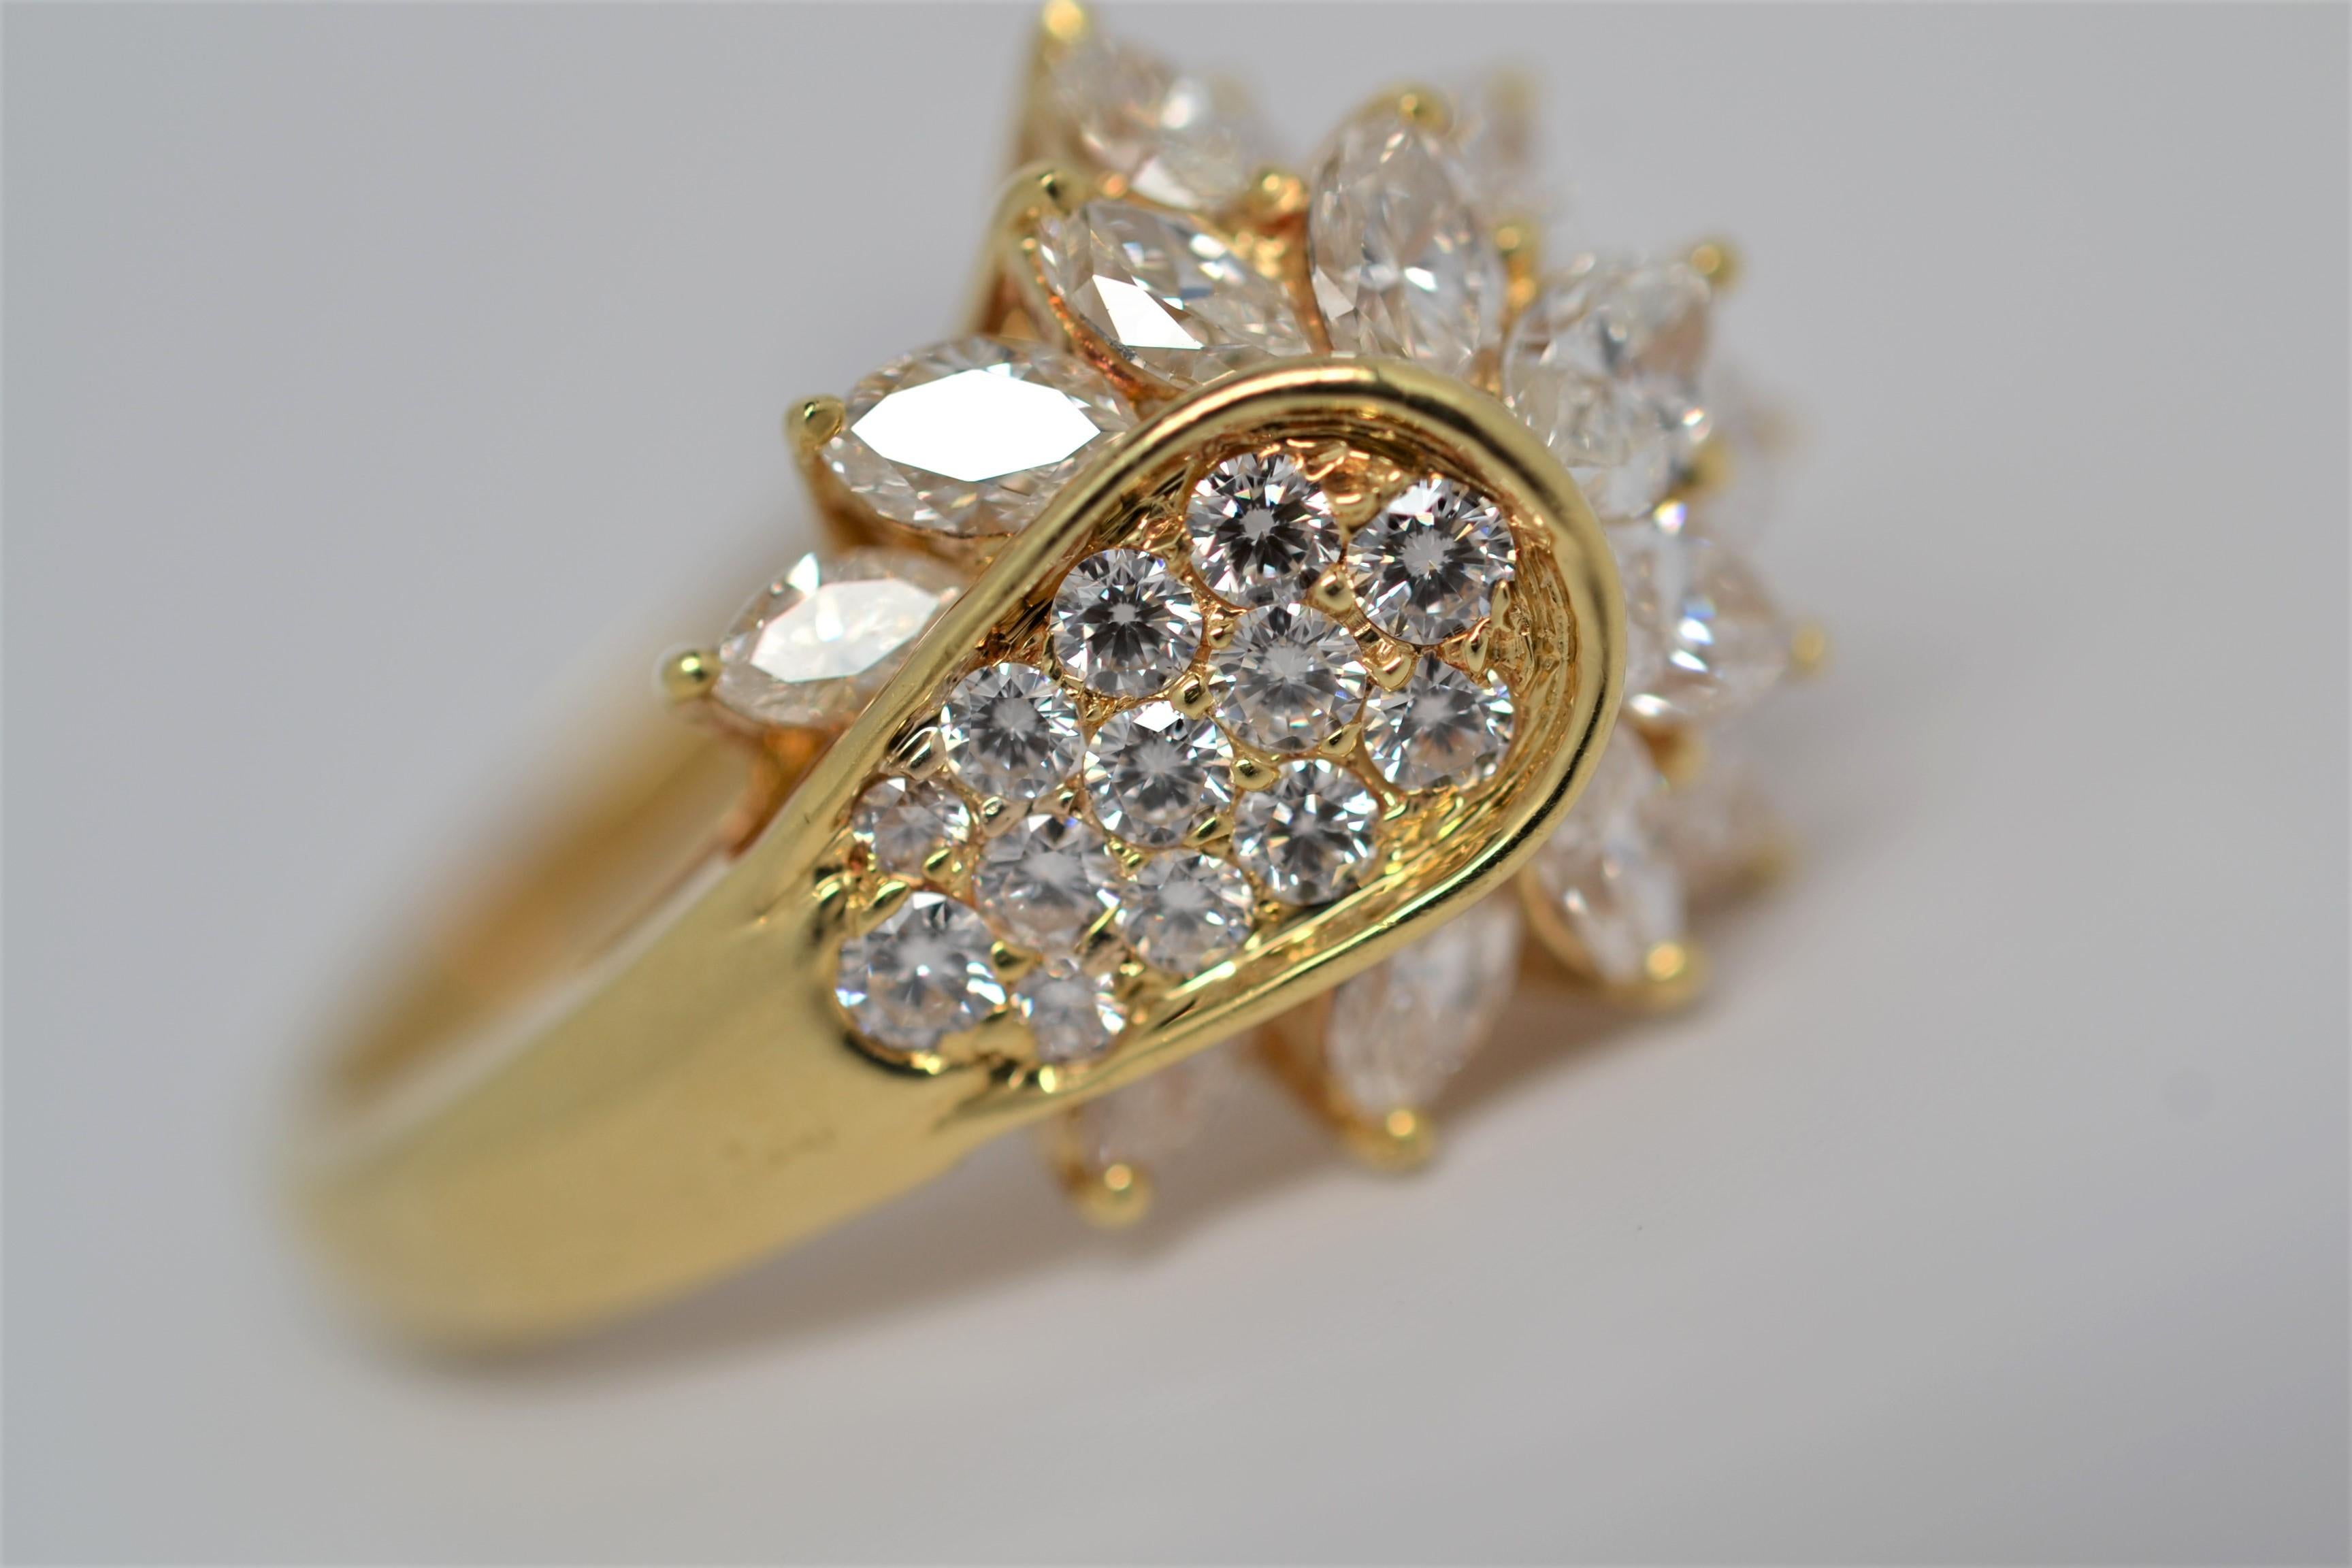 This bespoke ring is a handmade design and set in 18K Yellow Gold with Marquise Cut & Round Brilliant Cut Diamonds. A statement piece with a unique layout of diamonds. There are sixteen Marquise Cut Diamonds that weigh 2.49ct total, diamond color